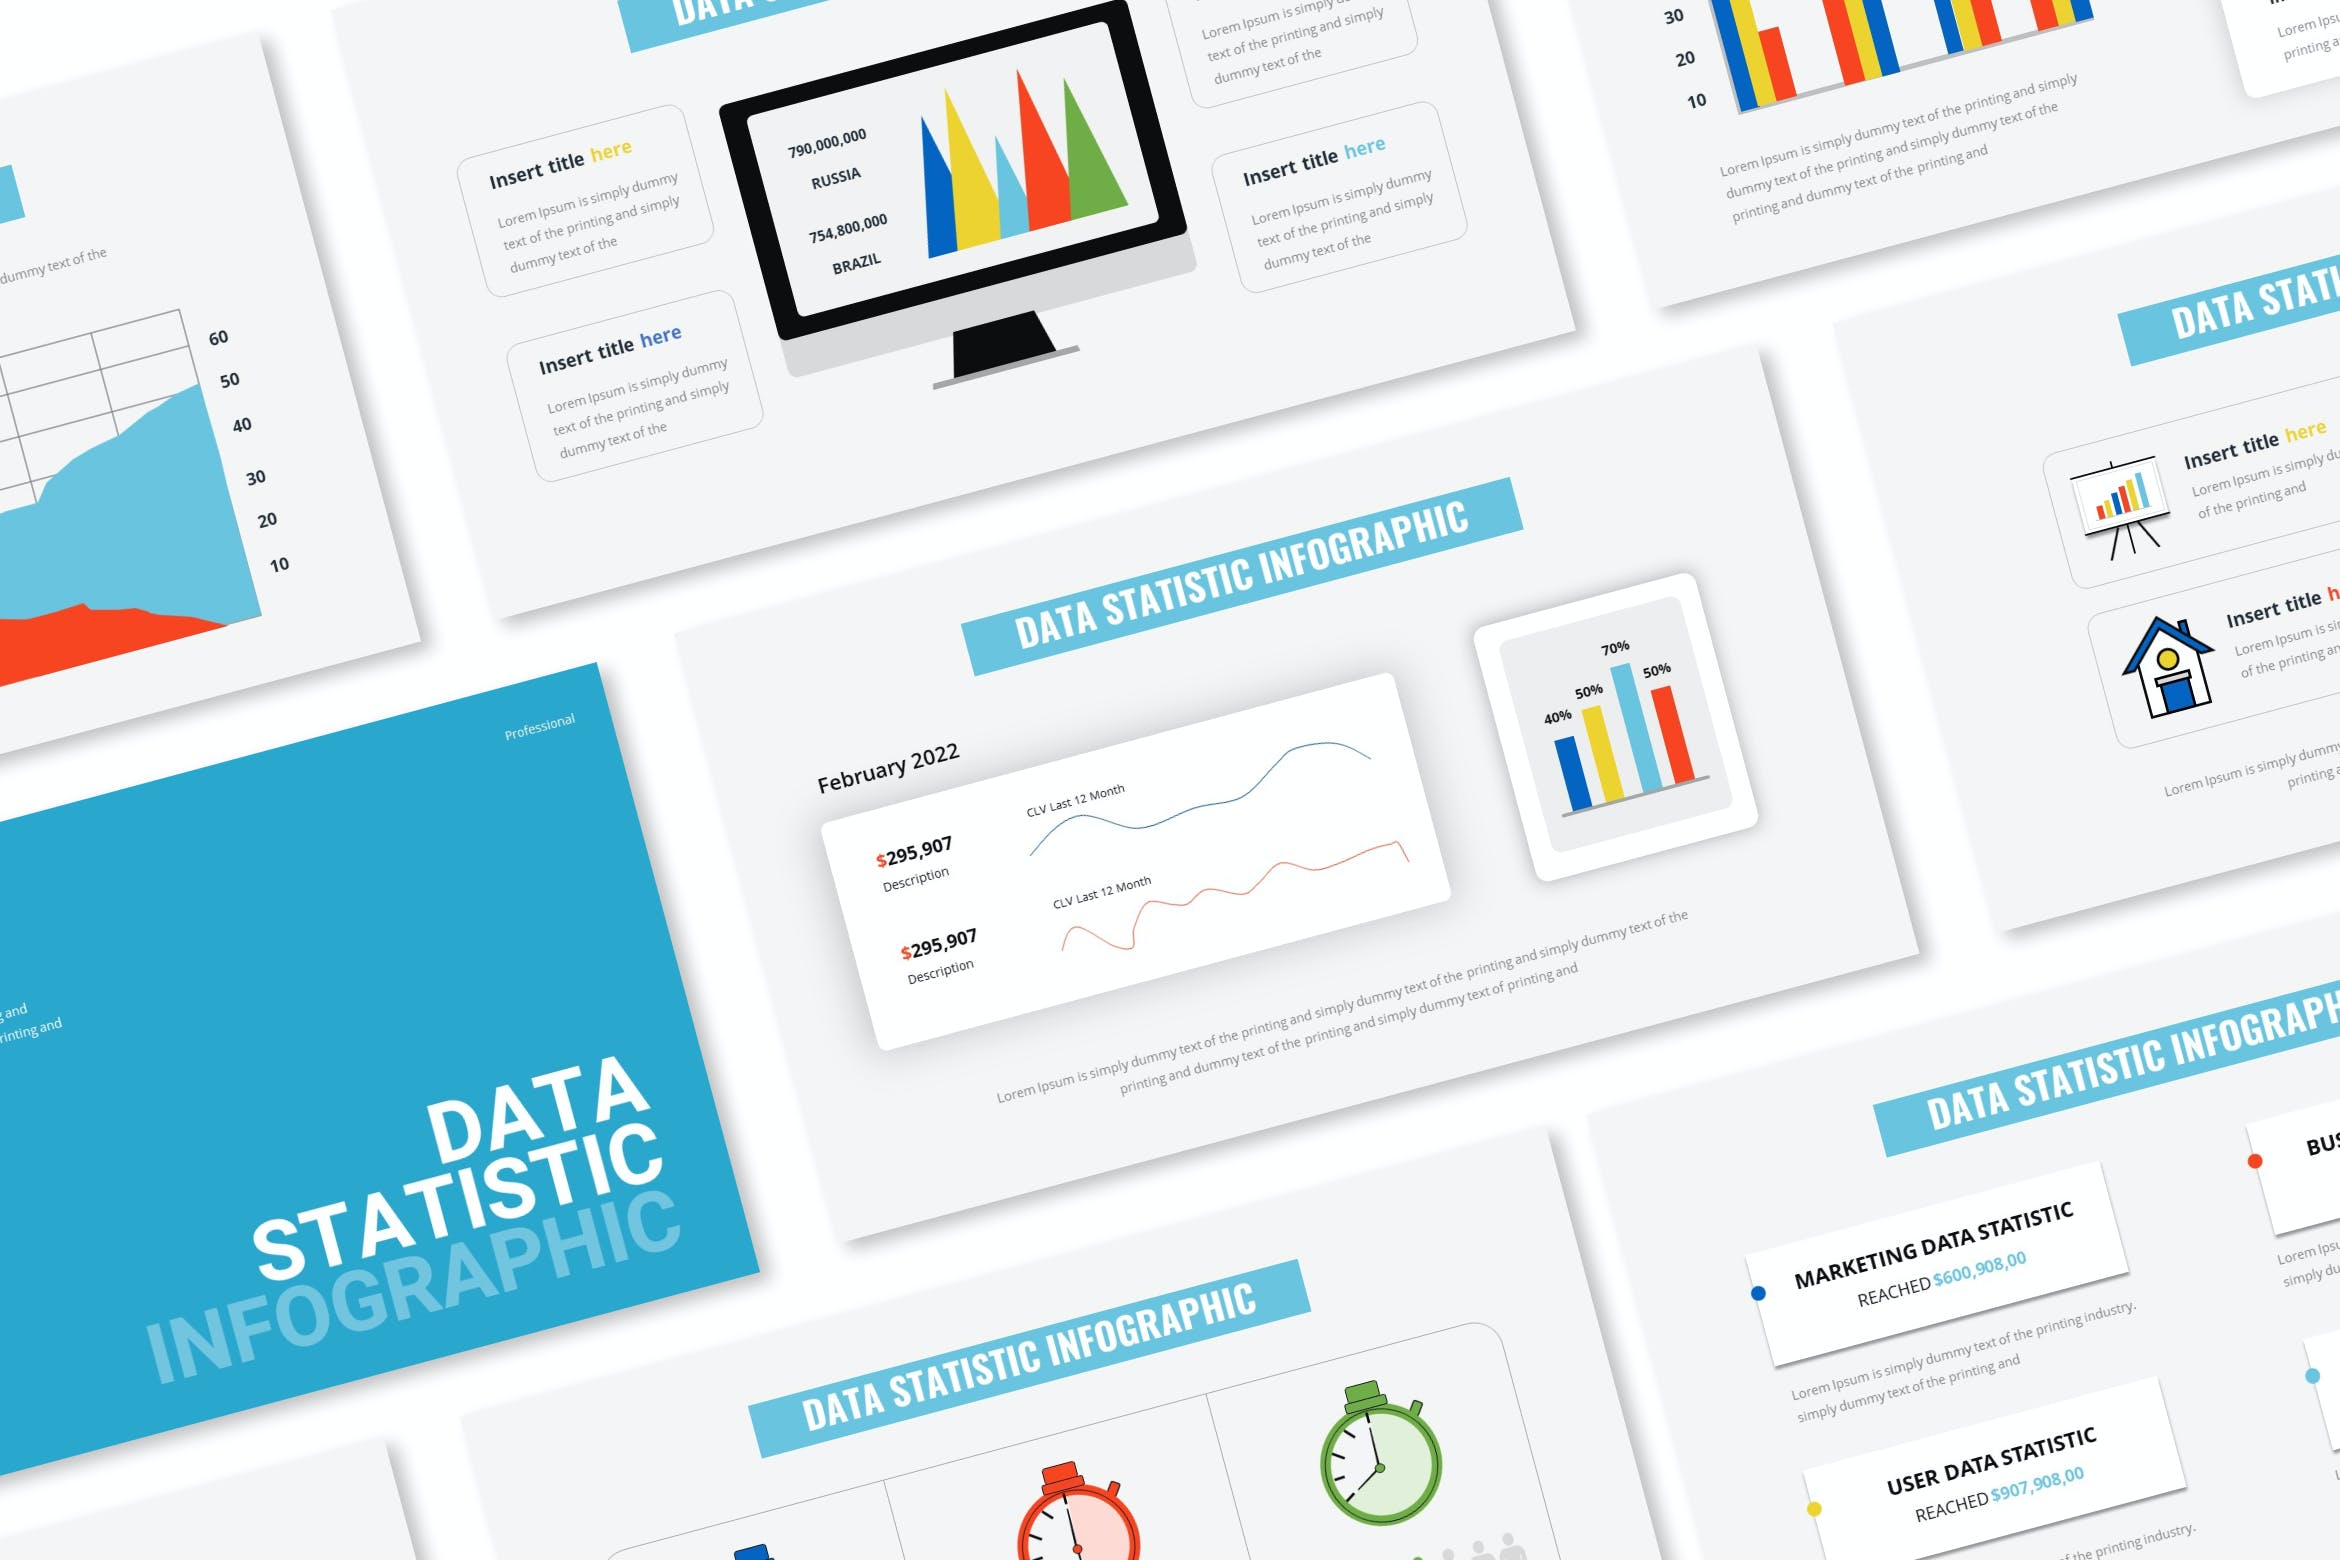 Cover image of Data Statistic Infographic Google Slides Template.